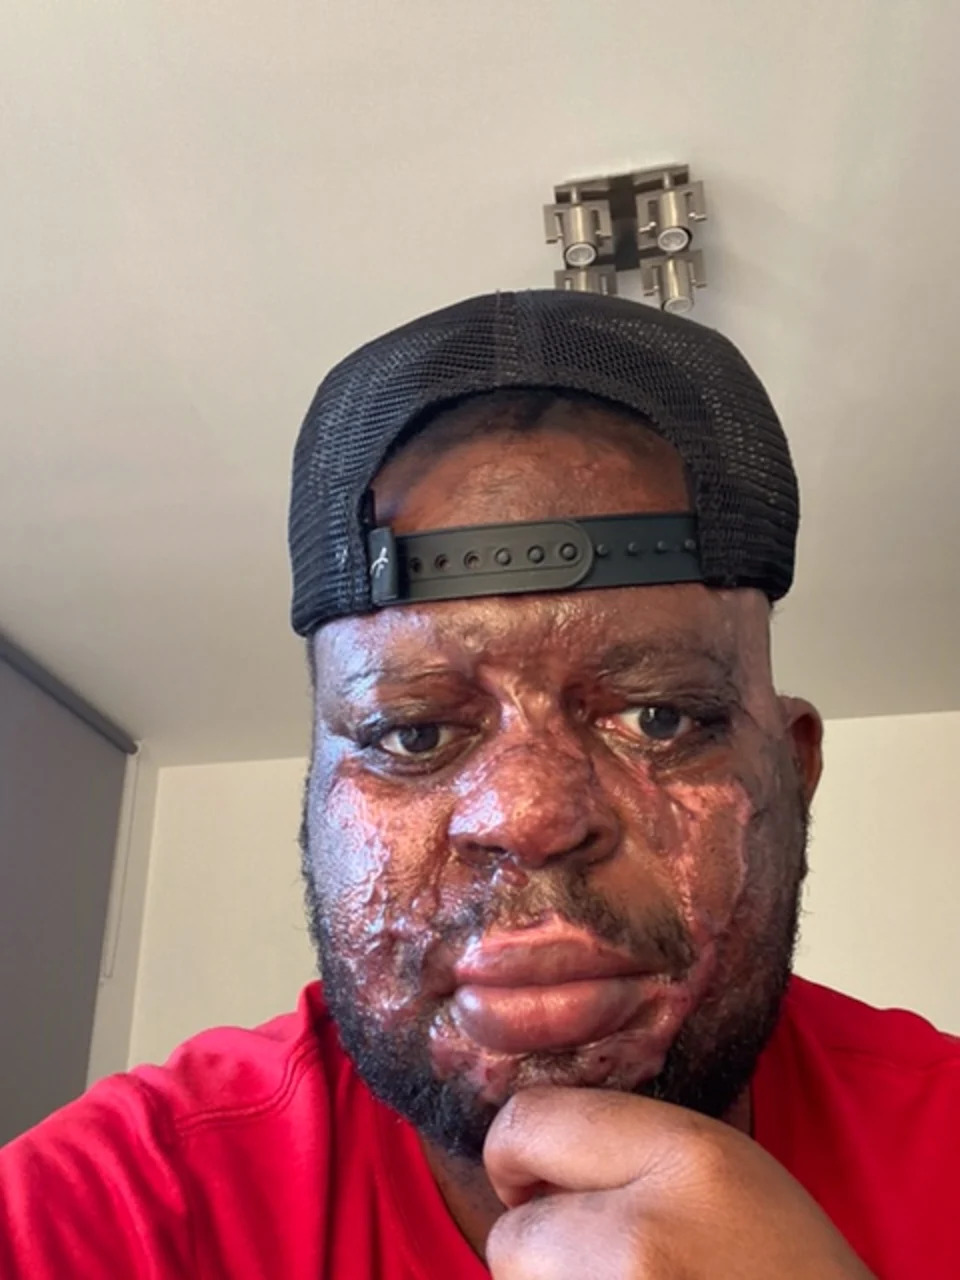 Kelvin Pogo suffered extensive burns to his face and body (Kelvin Pogo)